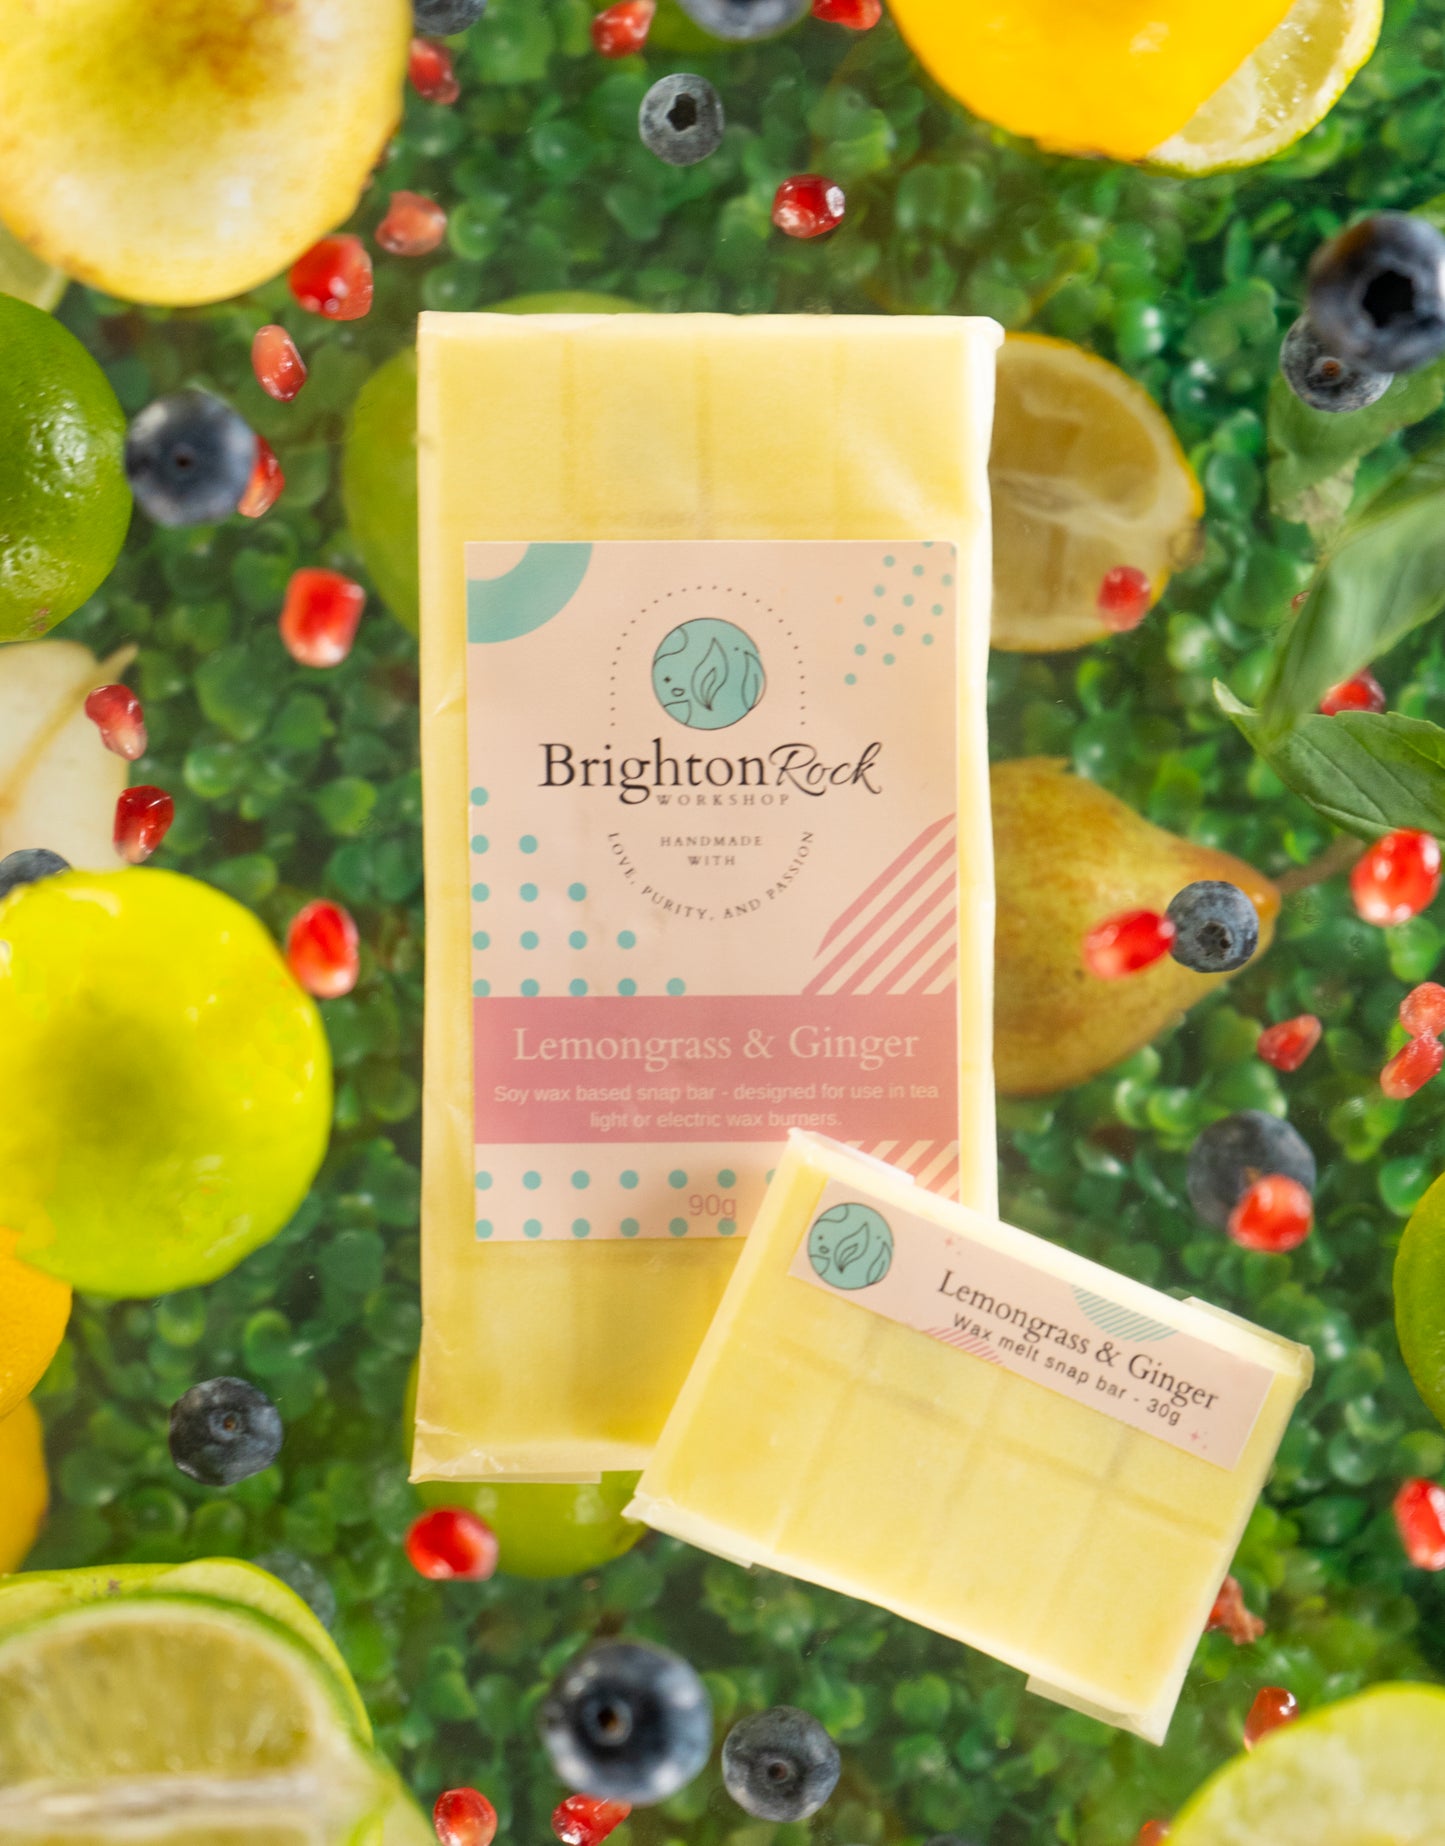 Lemongrass & ginger 30g or 90g strongly scented wax melt snap bars. Eco friendly waxed paper packaging. Brighton Rock Workshop wax melts made in Spain and the United Kingdom, available in two sizes. Suitable for tea light or electric burners